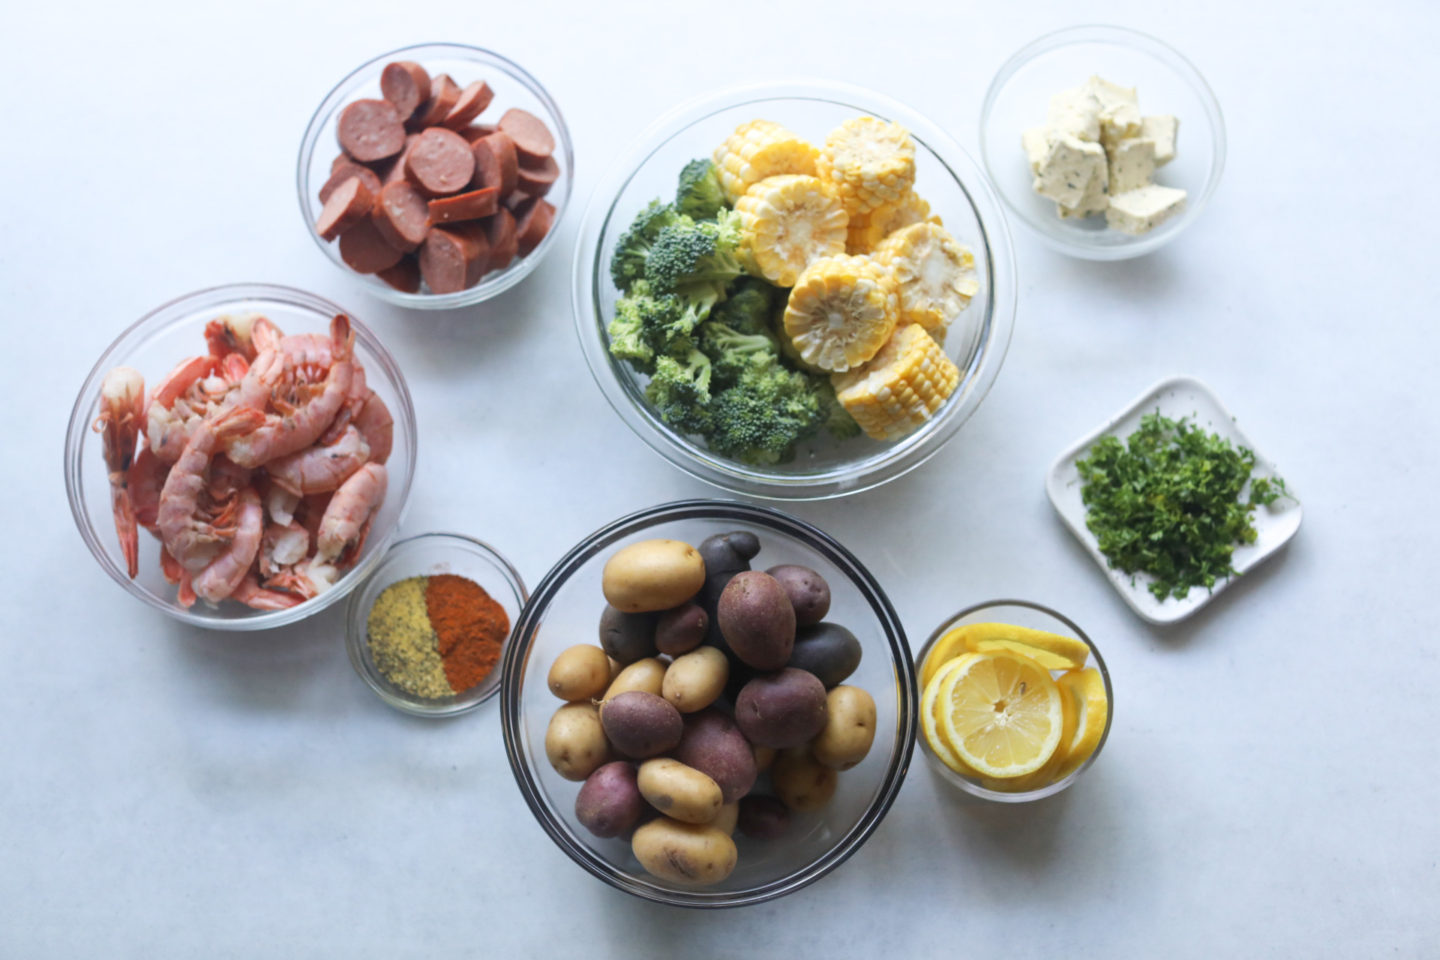 Shrimp foil packets in oven ingredients. In a flat lay are clear bowls filled garlic butter, sausage, shrimp, Cajun and lemon and pepper seasoning, small assorted colored potatoes, sliced lemons, and a small white plate with chopped parsley.